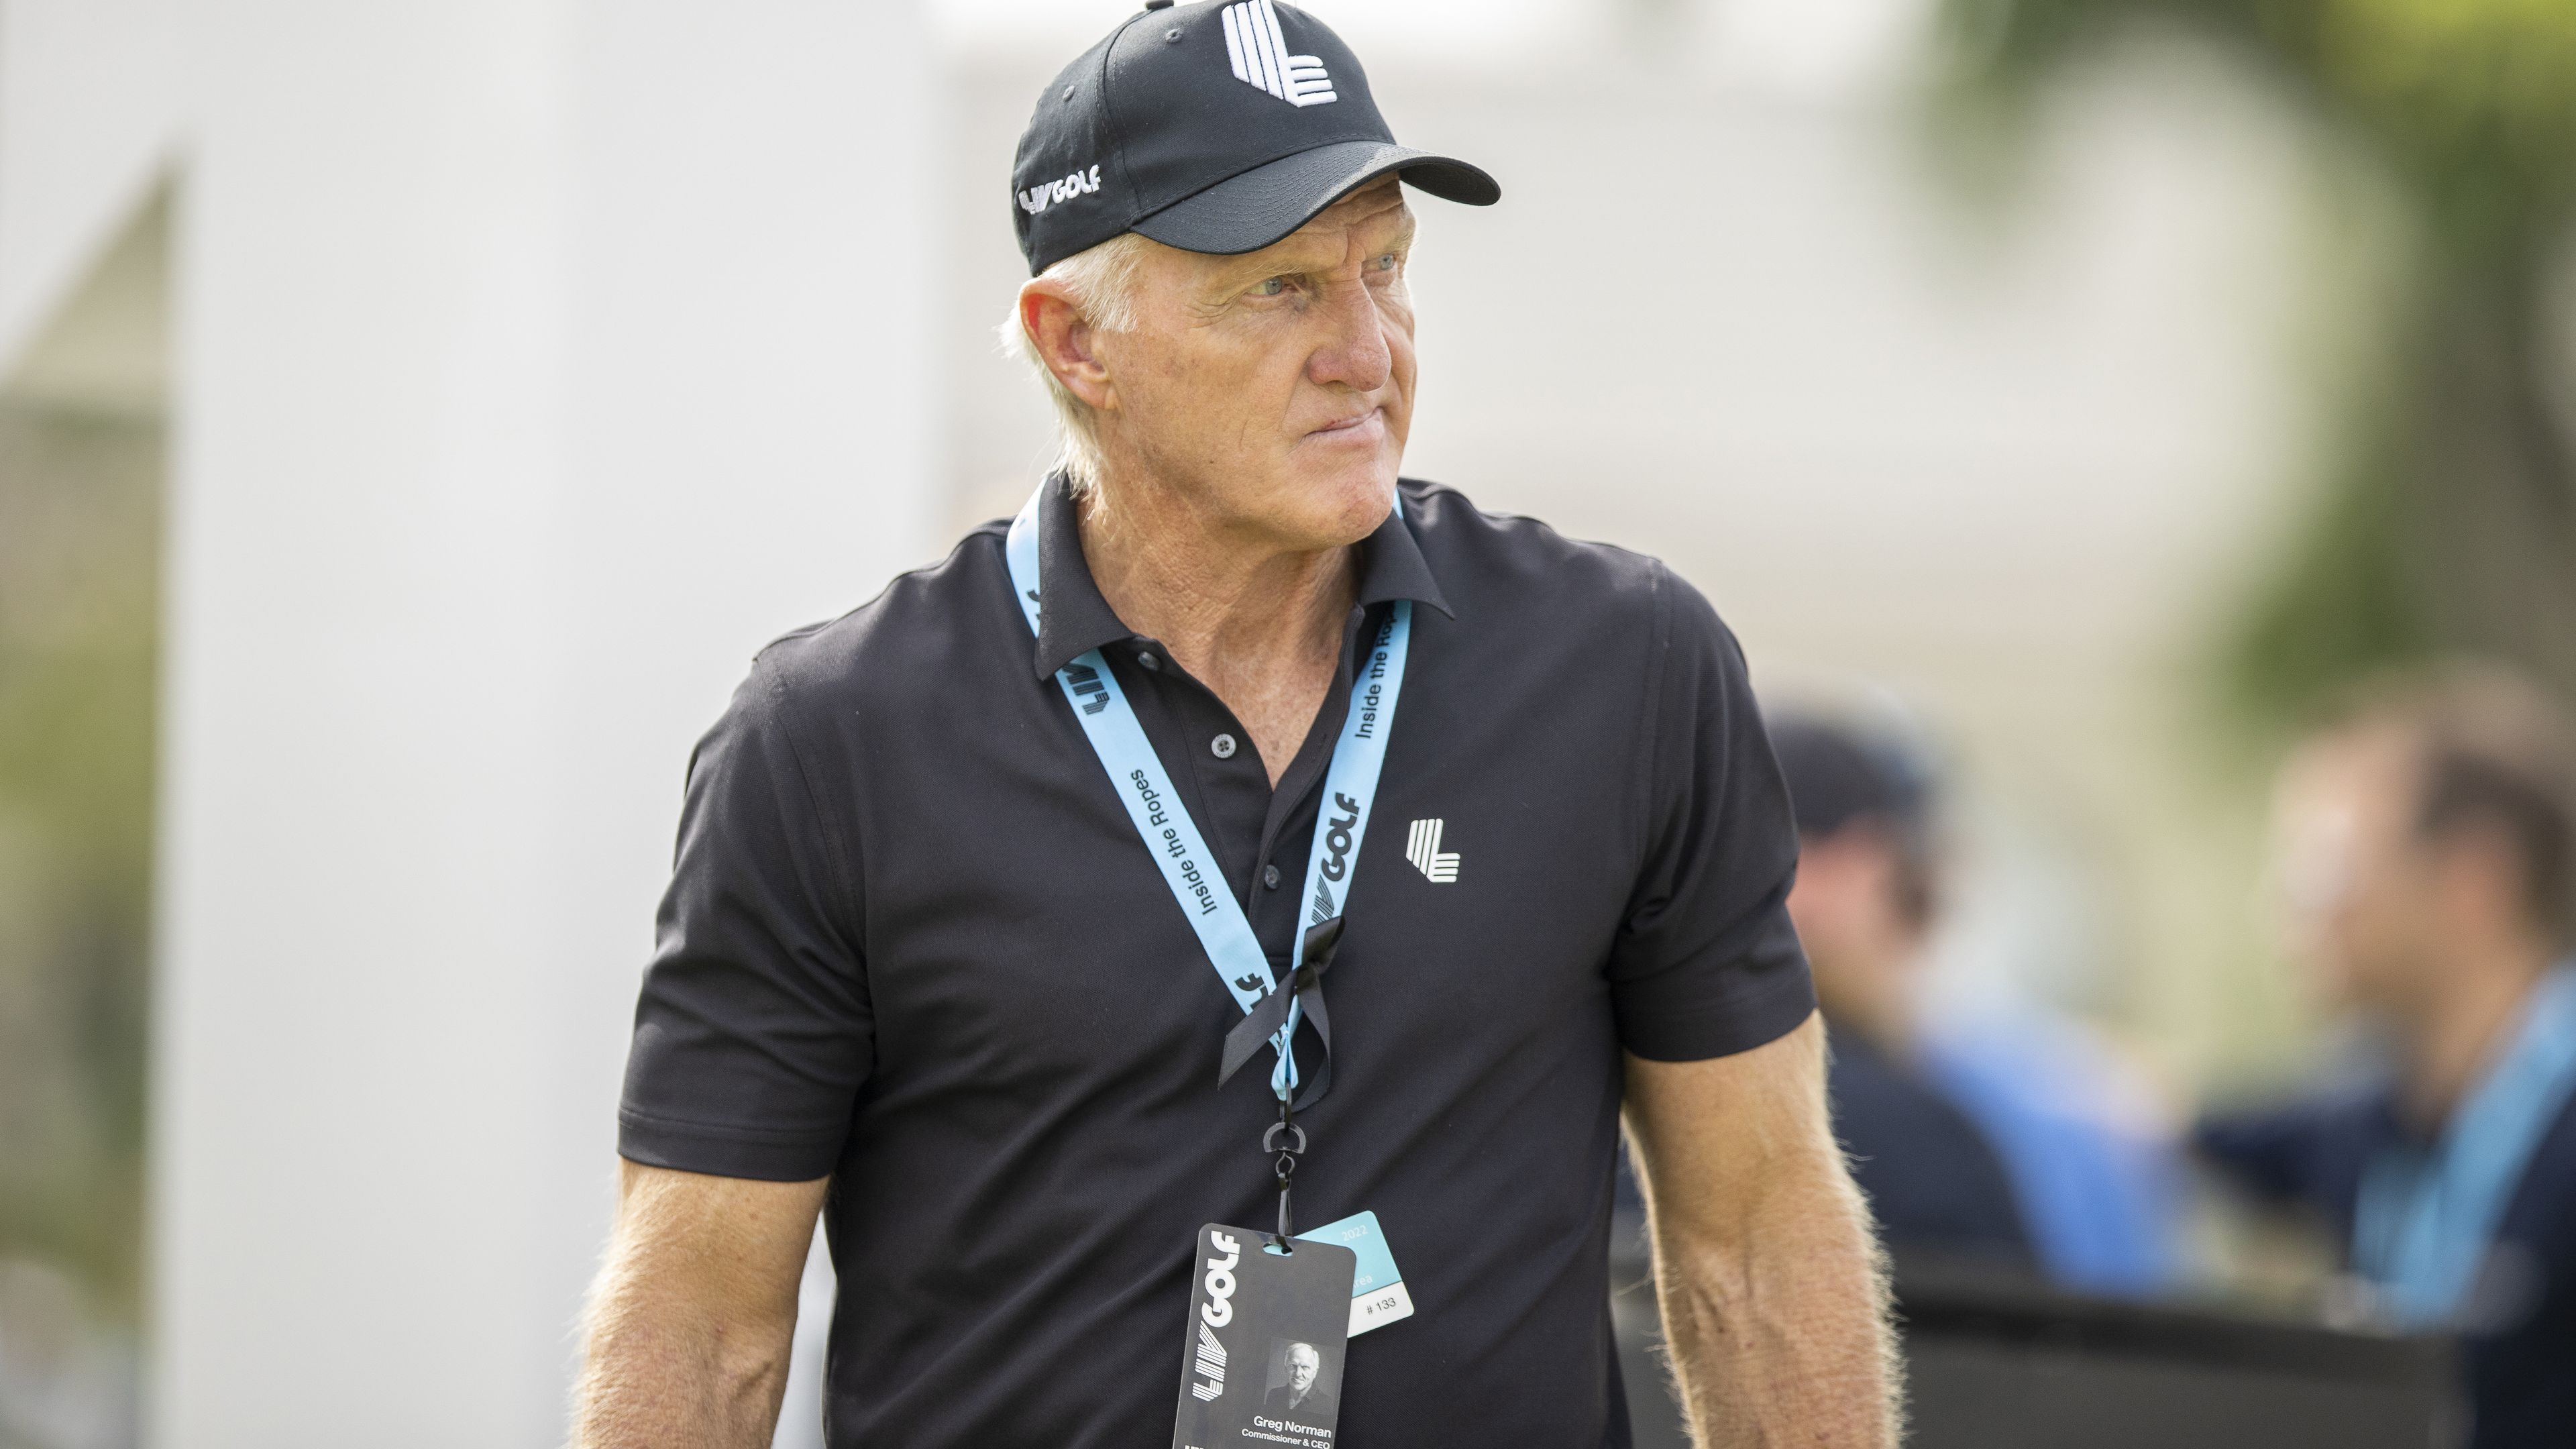 Greg Norman reveals sad reality after 'ruffling feathers' with LIV Golf venture